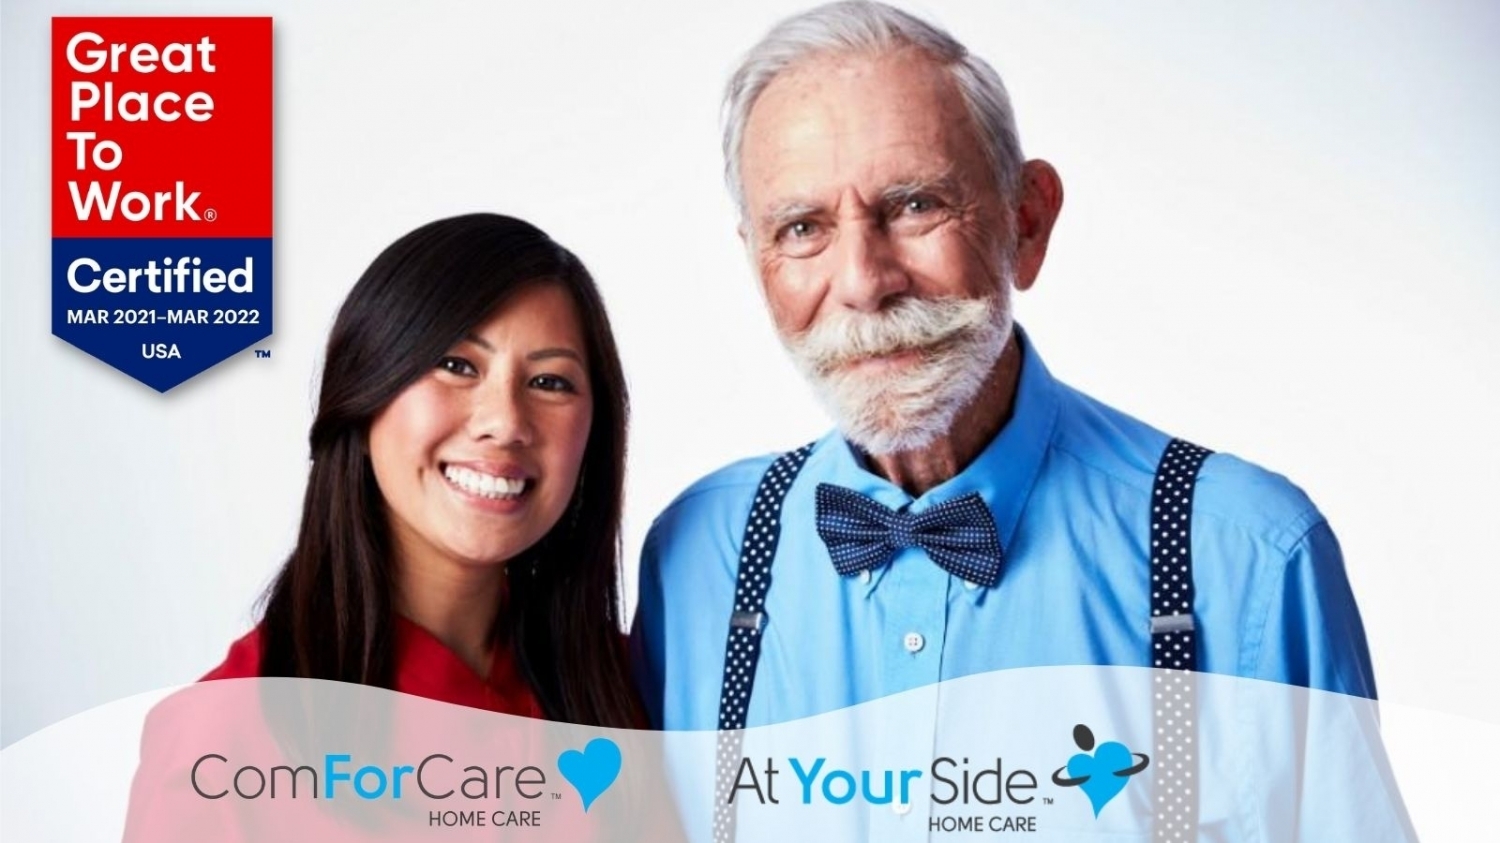 At Your Side Home Care - Huntsville, TX image